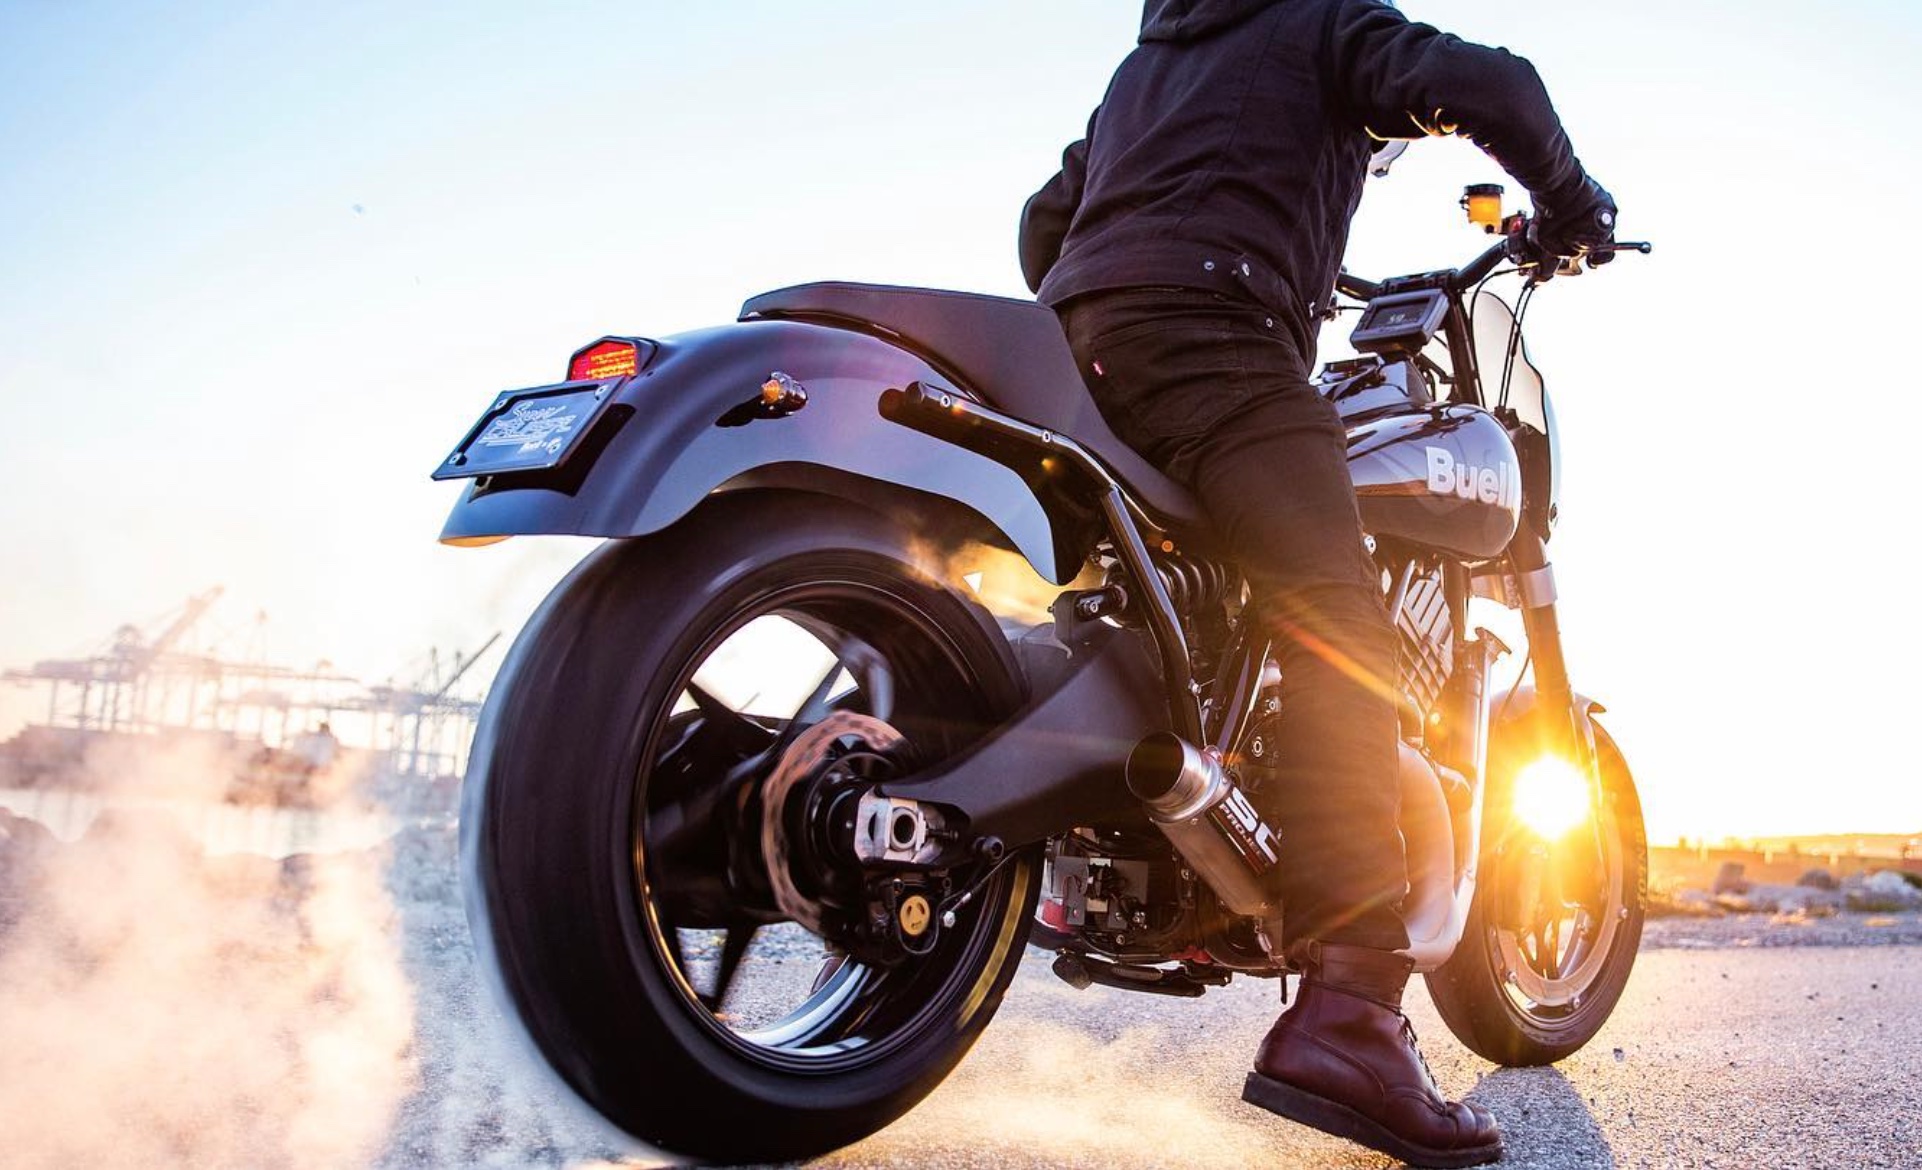 Buell's new bike, dubbed the Super Cruiser. Media sourced from Buell's recent press release.